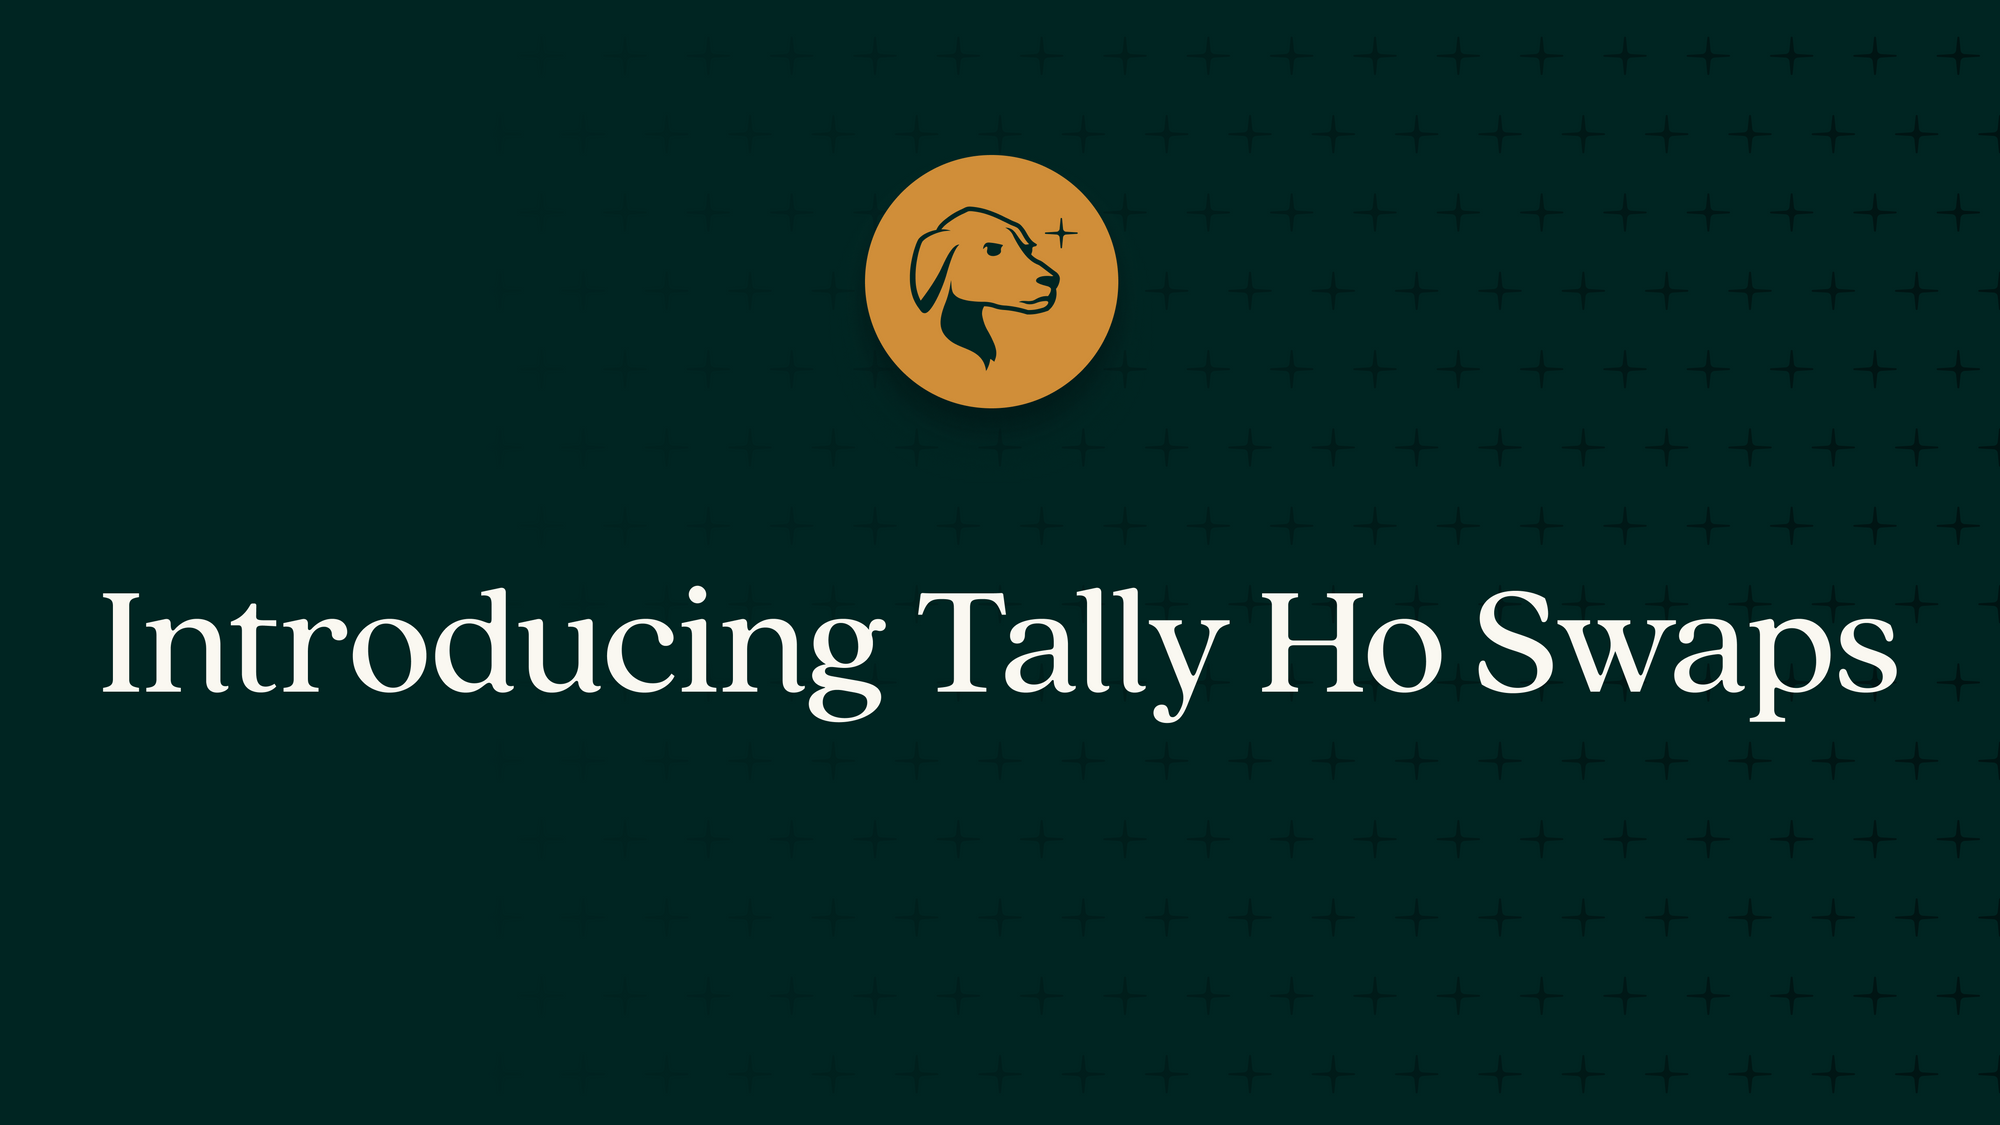 Introducing Tally Ho Swaps!